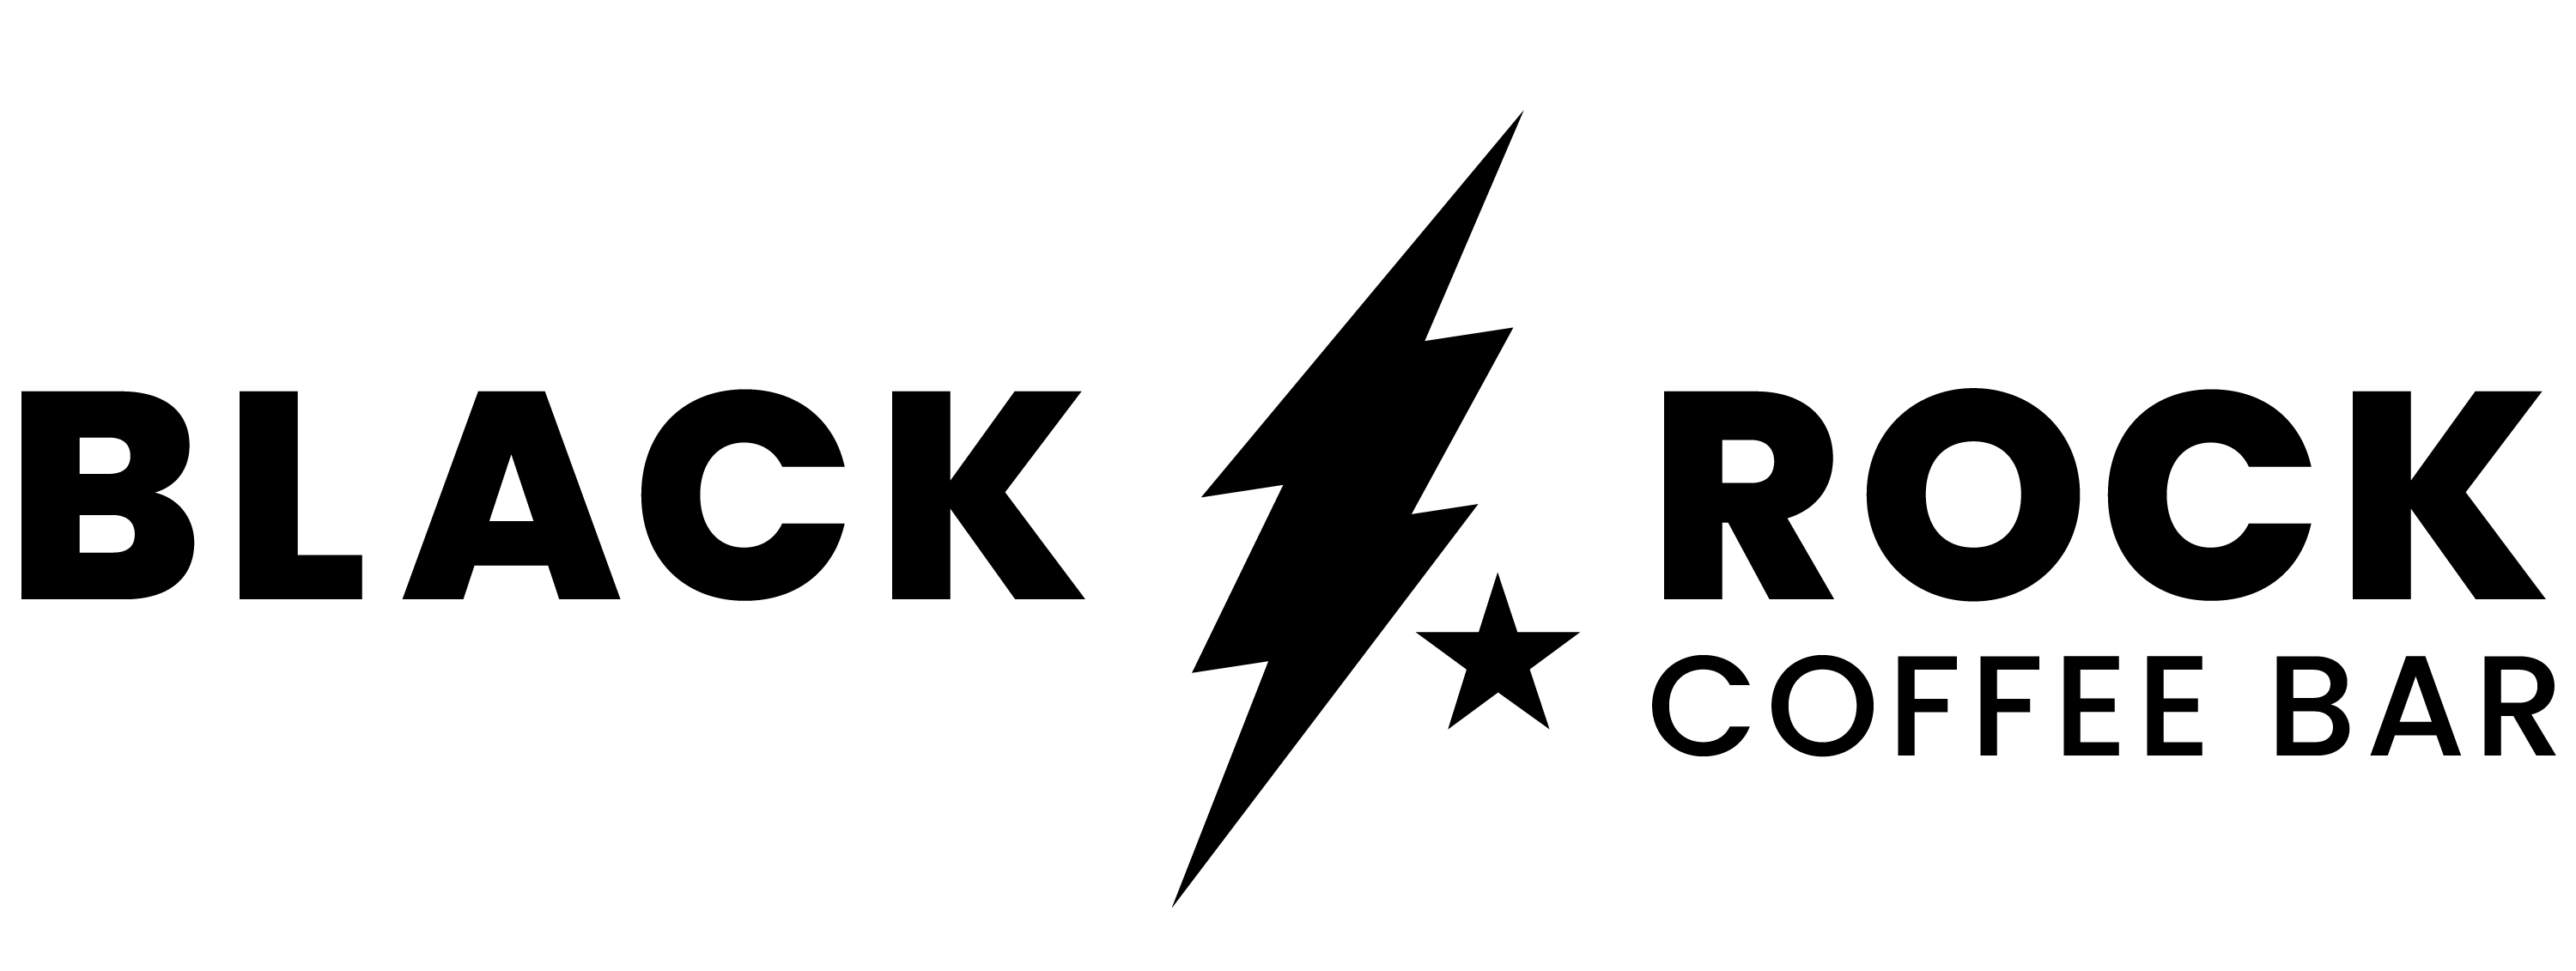 Black Rock Coffee Bar Increases its Texas Reach with the Opening of a New Store in McKinney